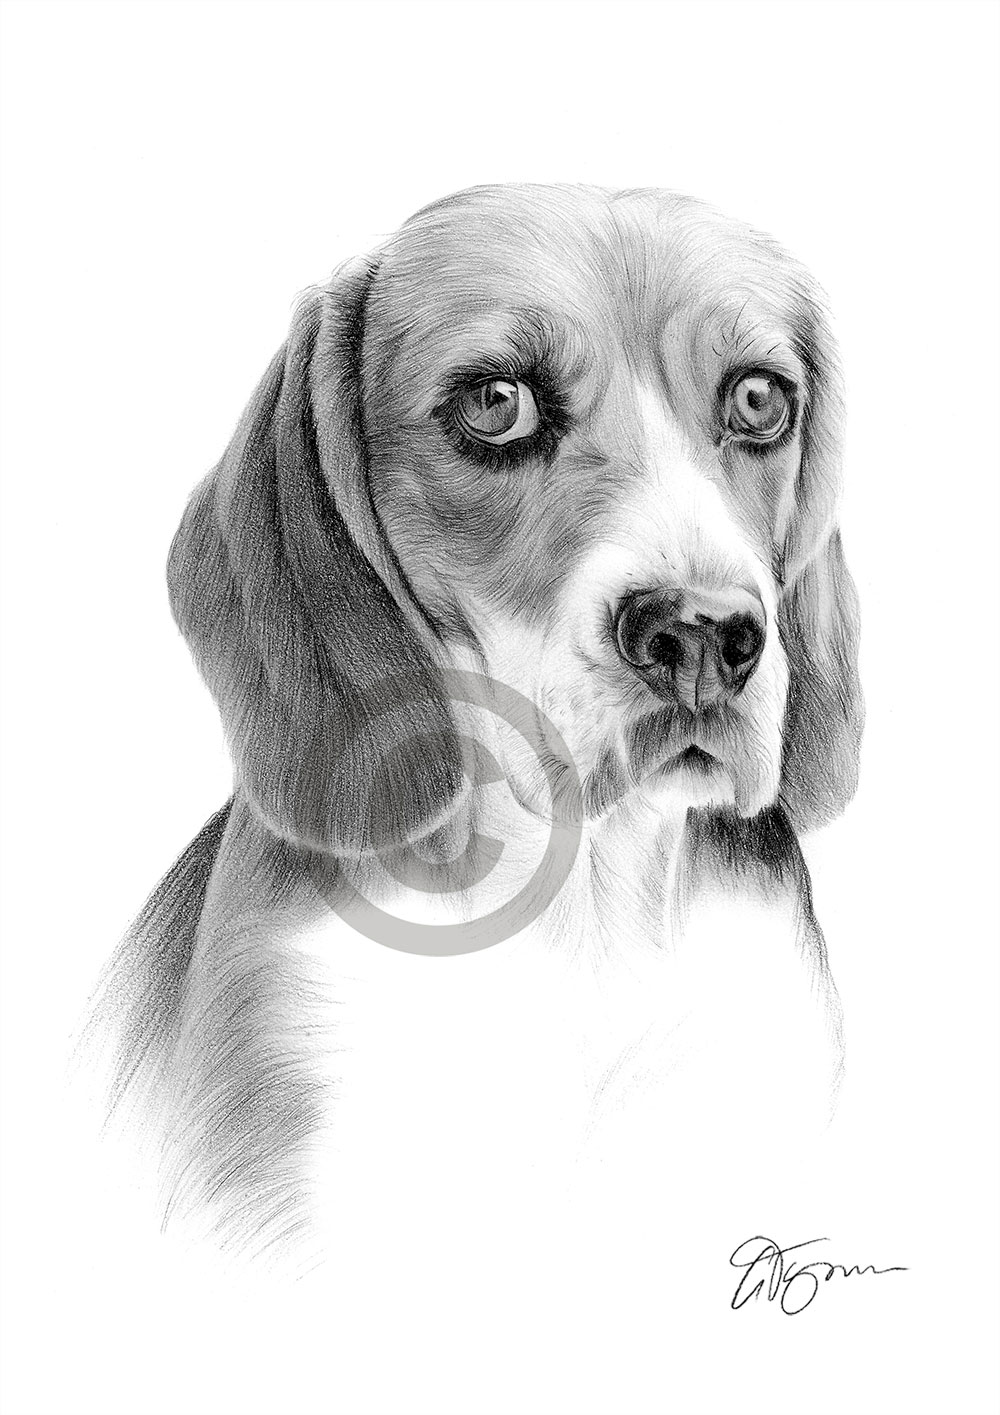 Pencil drawing of a Beagle by artist Gary Tymon